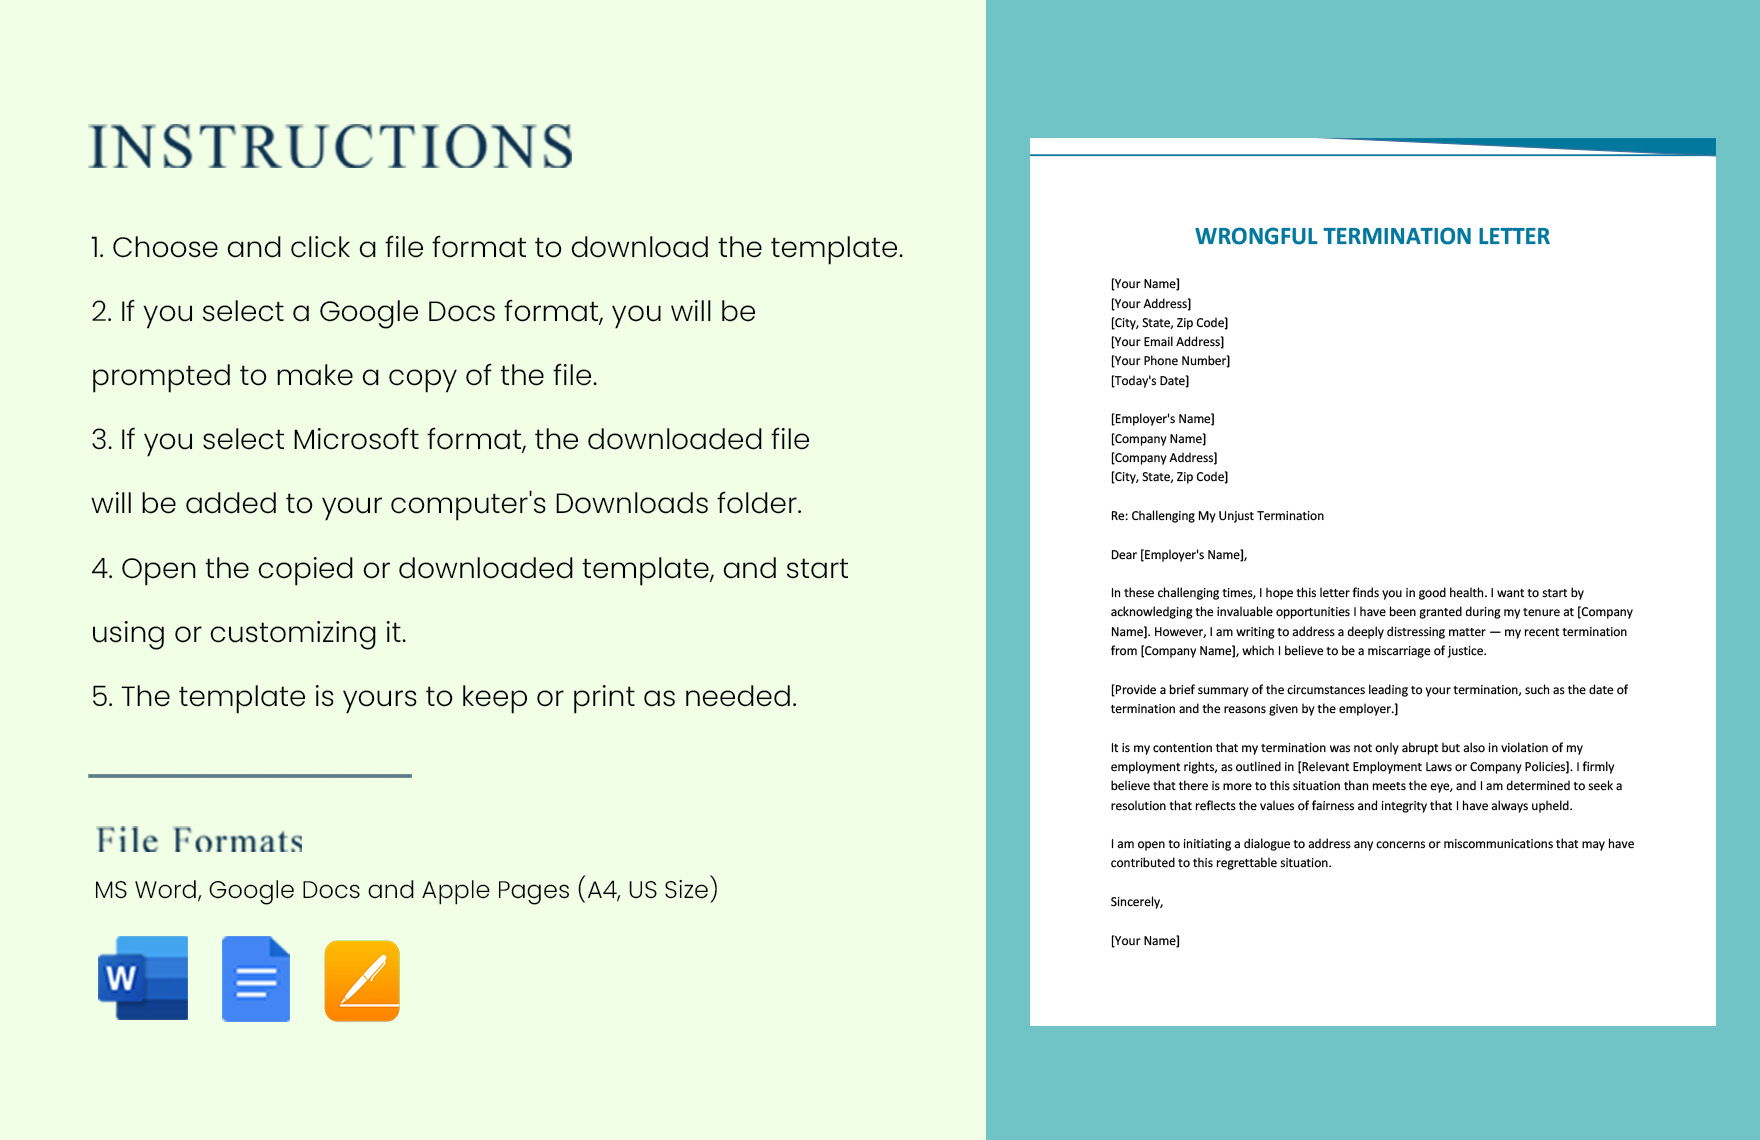 Wrongful Termination Letter